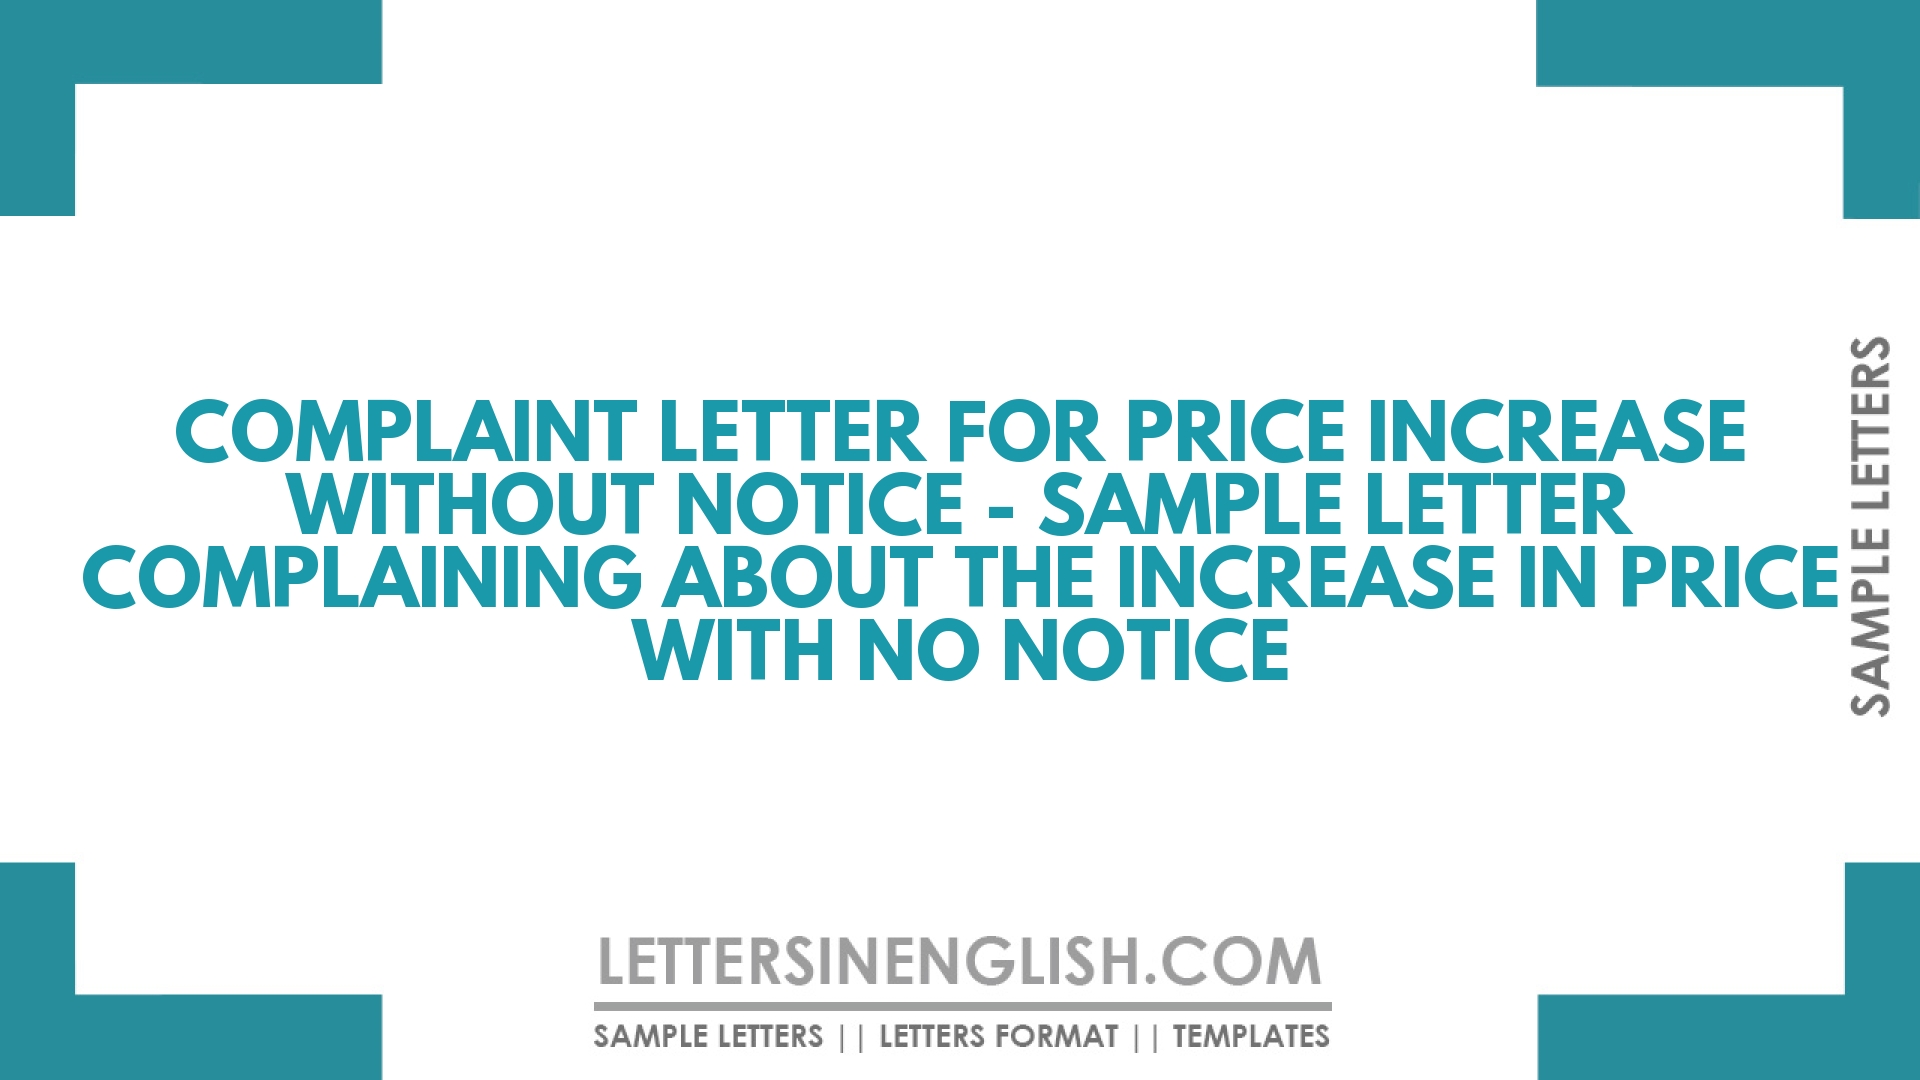 Complaint Letter for Price Increase Without Notice – Sample Letter Complaining About the Increase in Price With No Notice